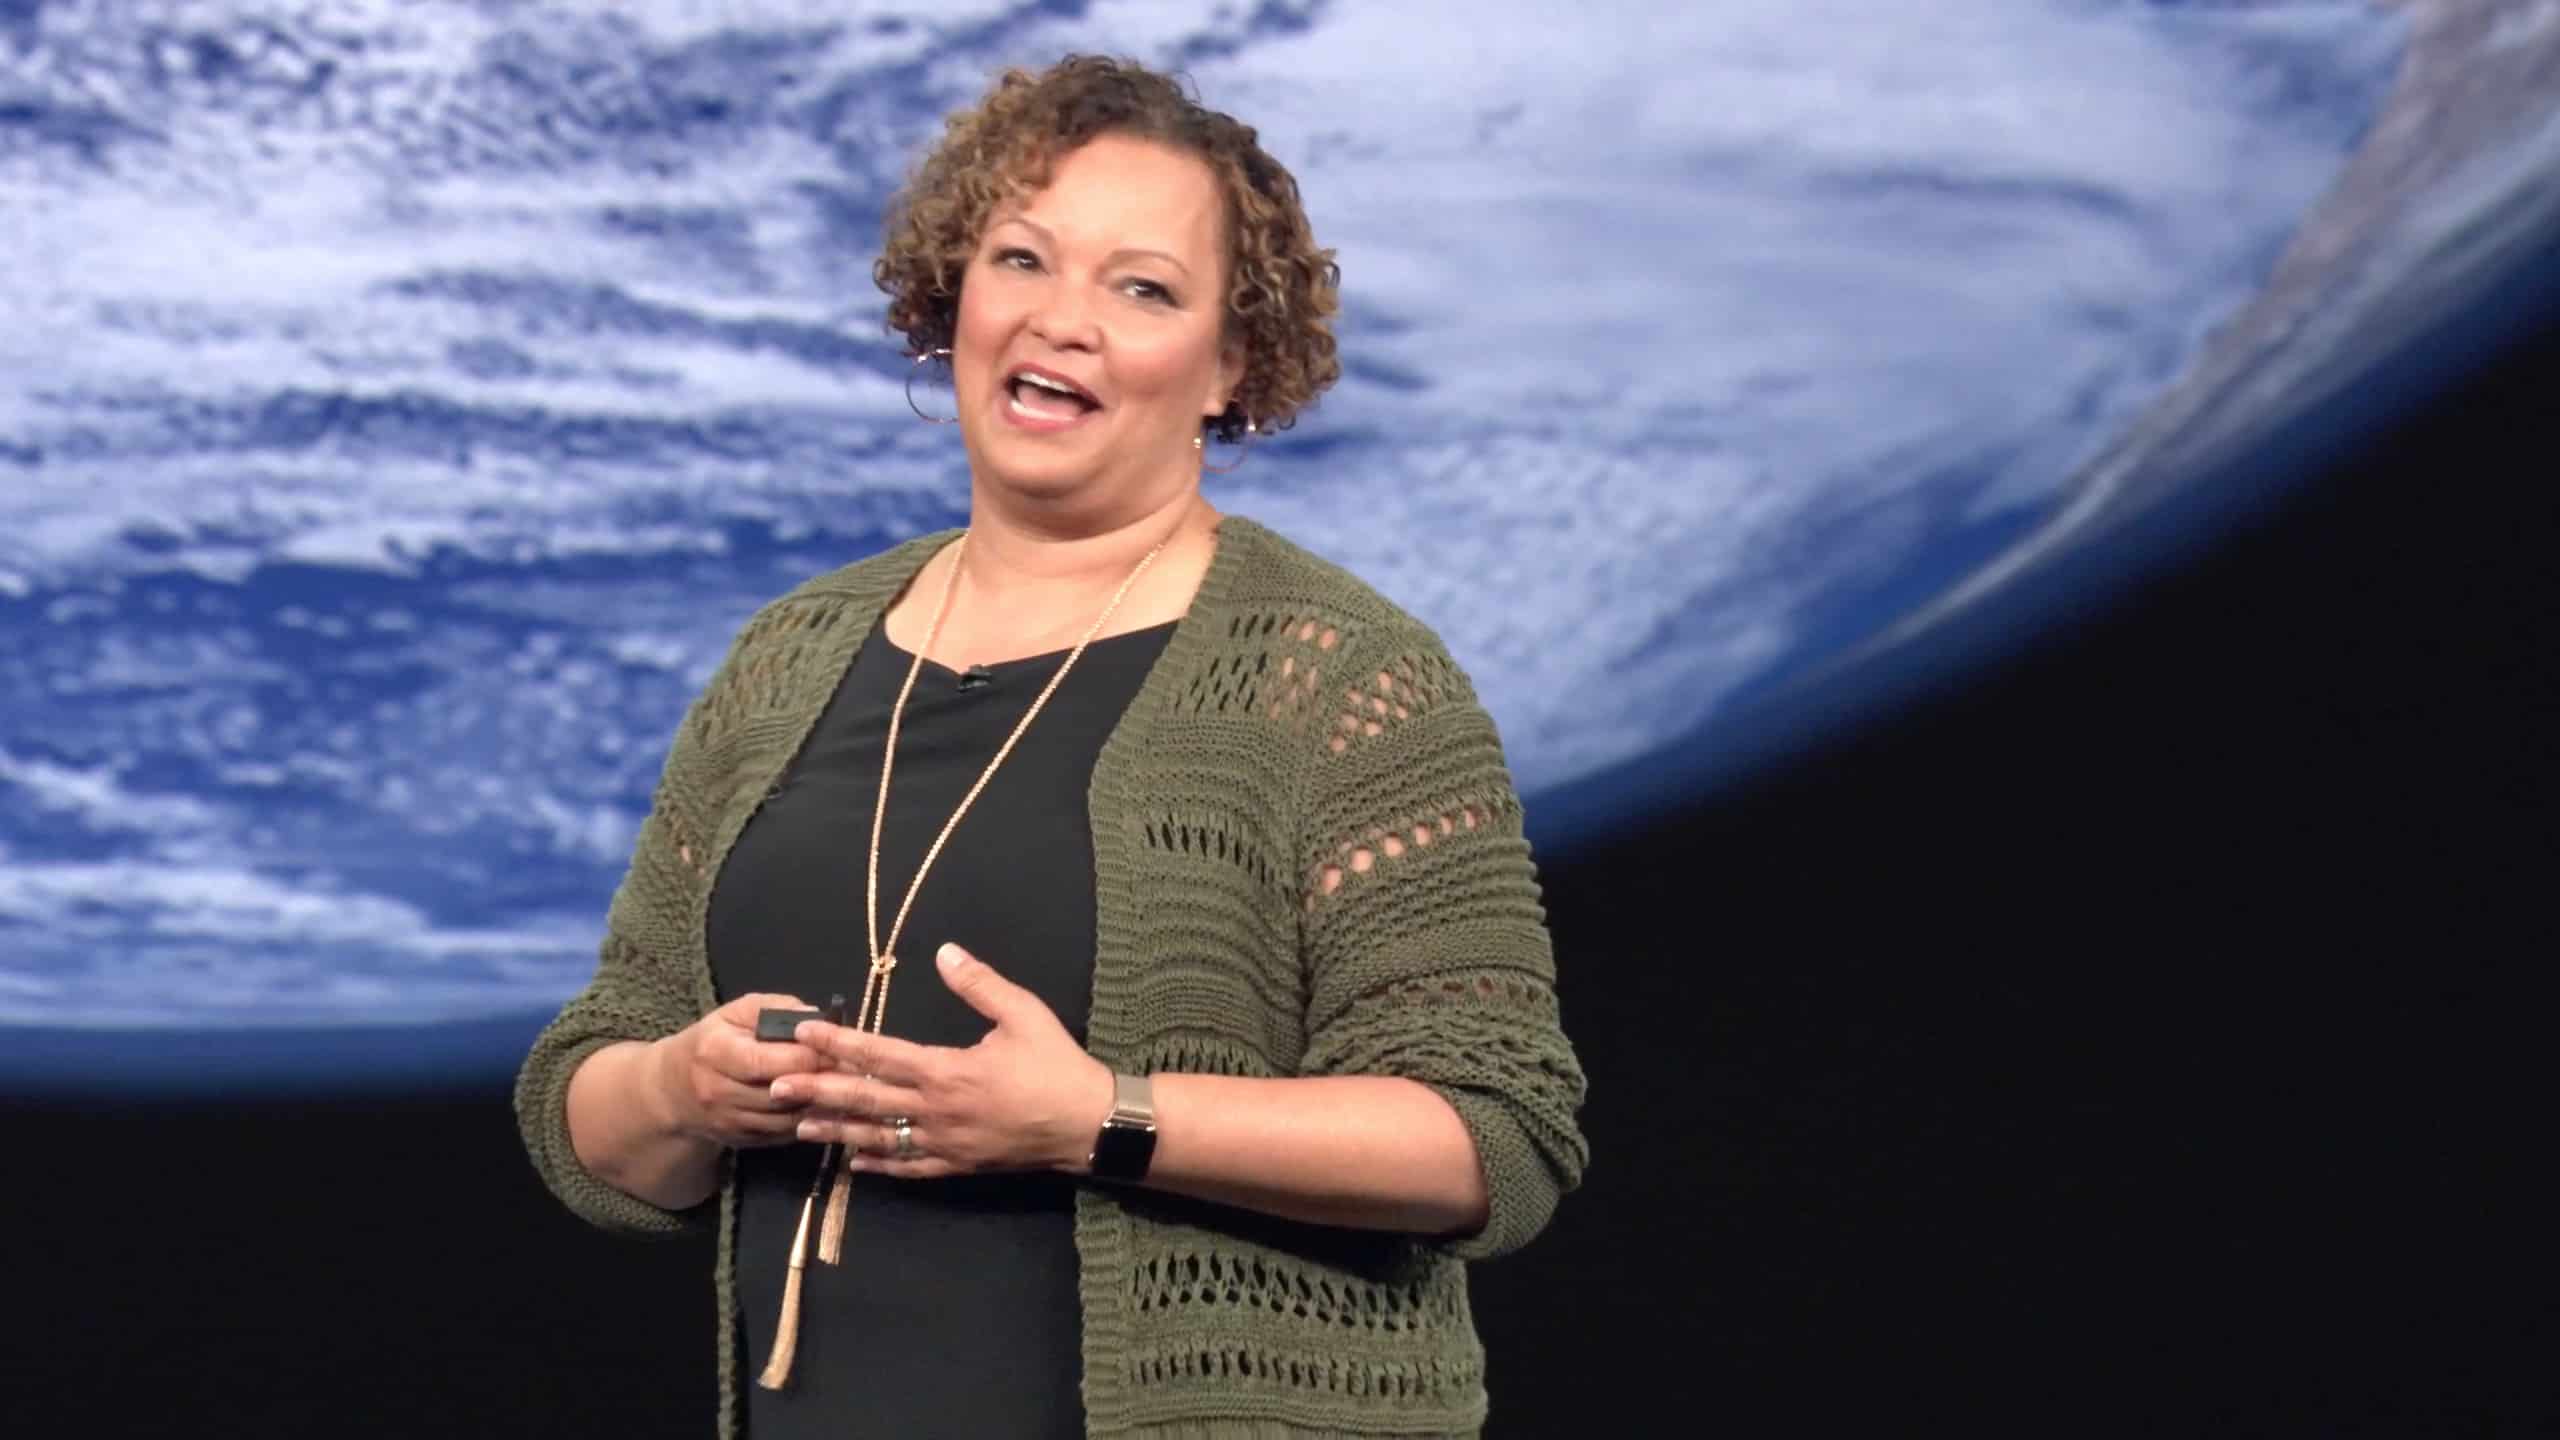 Apple VP Lisa Jackson showcases Apple's environmental efforts during the Gather Round event.